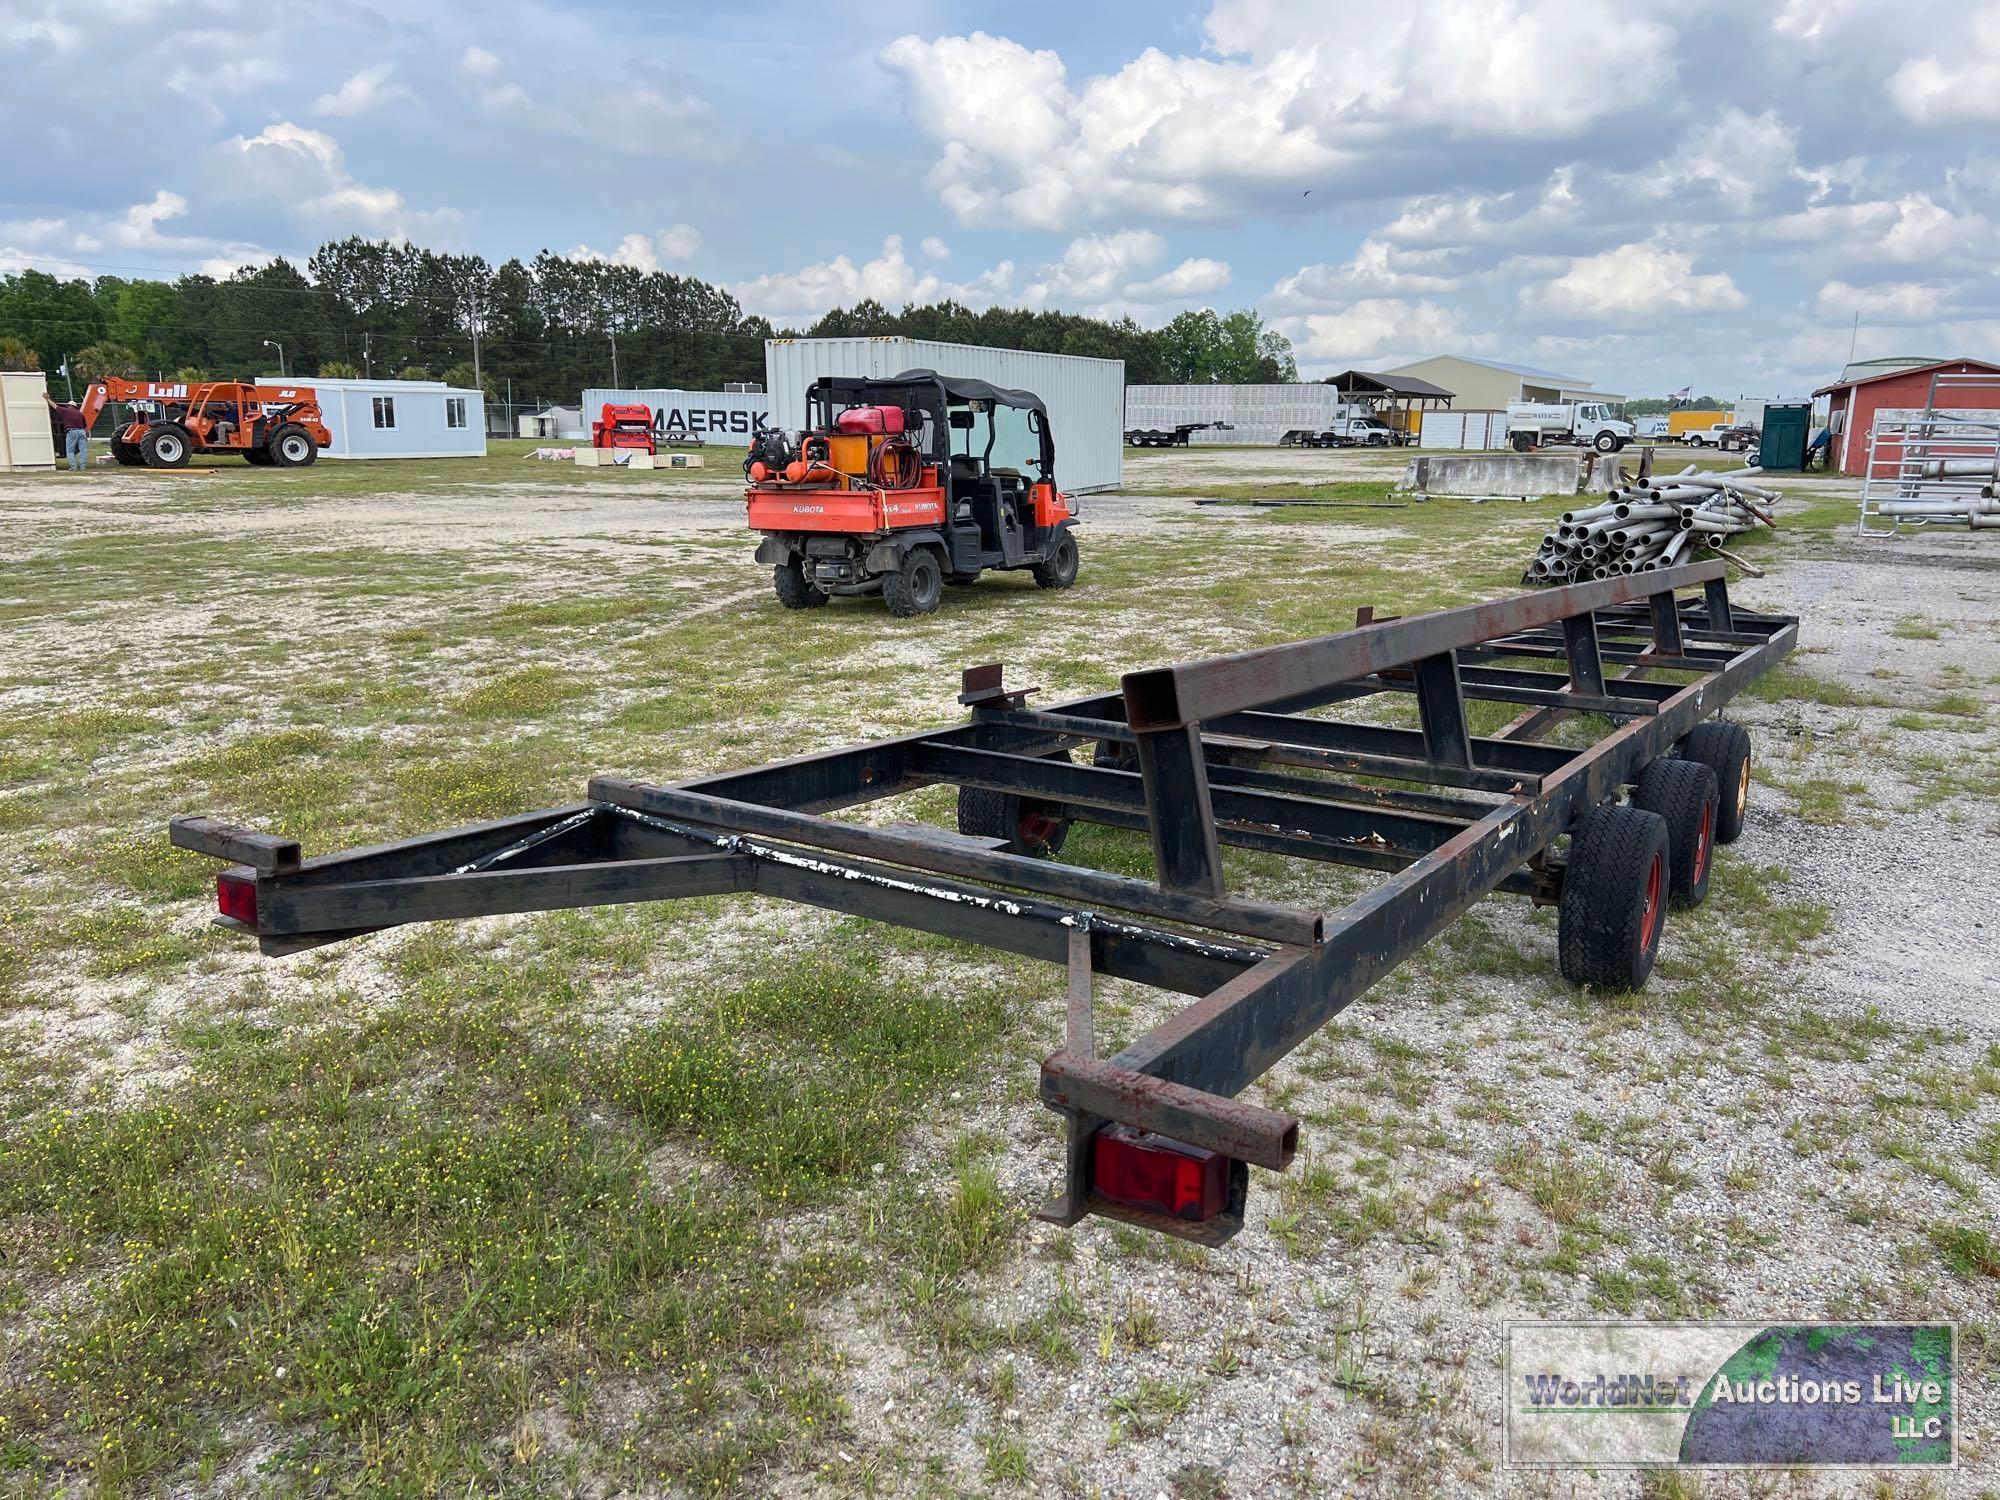 HOMEMADE TRI-AXLE HEADER TRAILER **NO TITLE, INVOICE ONLY**